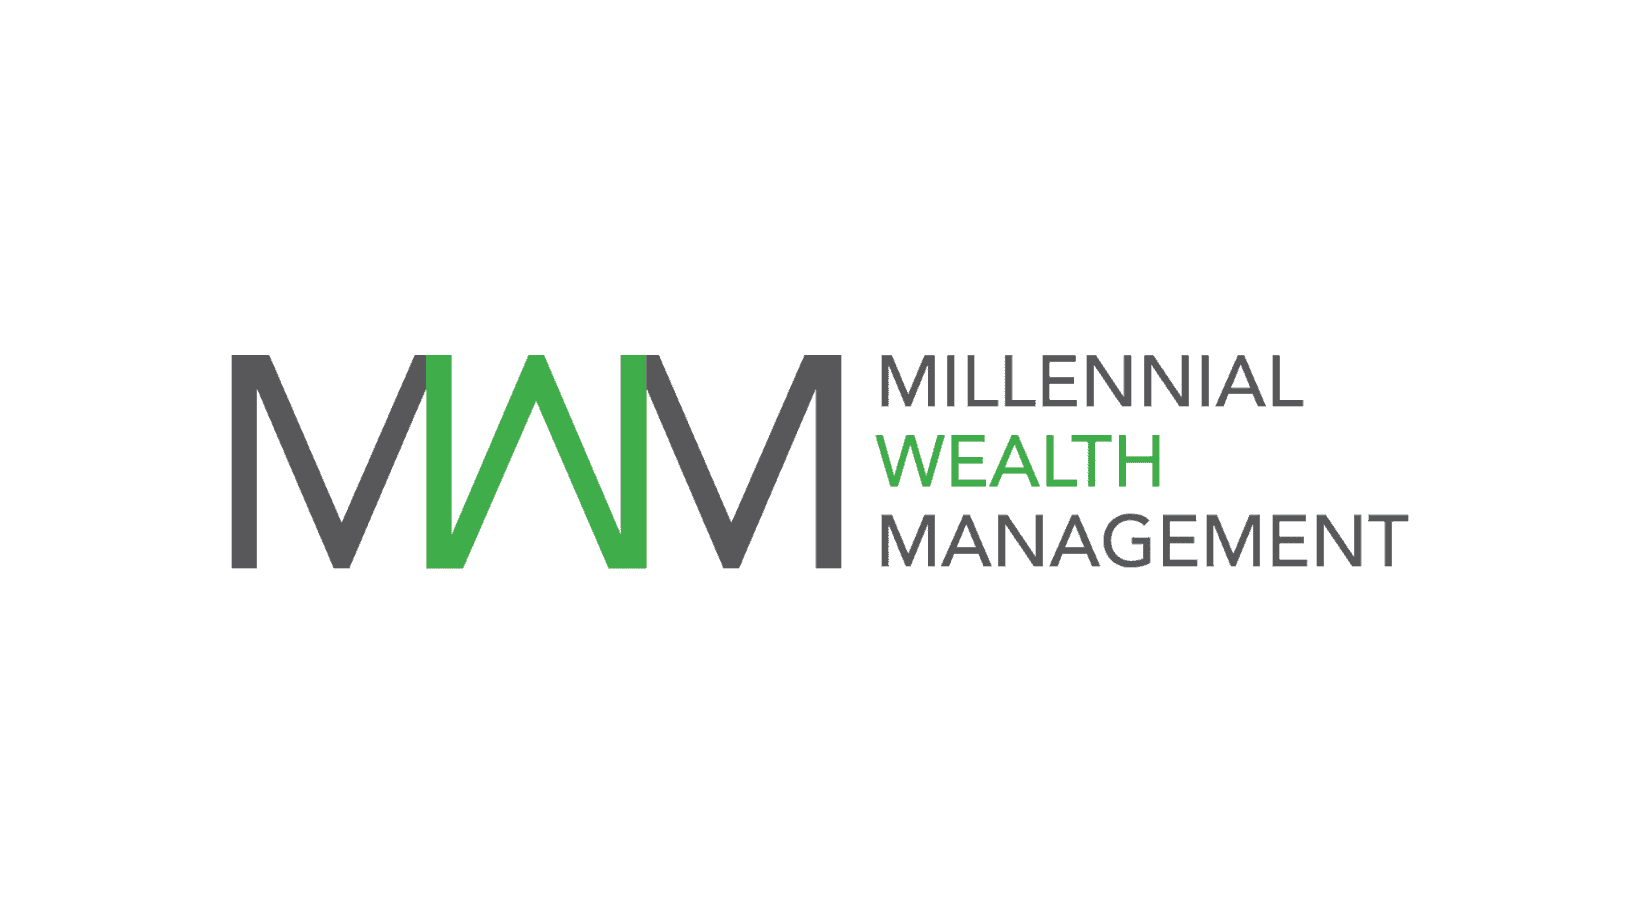 Old vs. New Wealth Management Part II: Role Changes